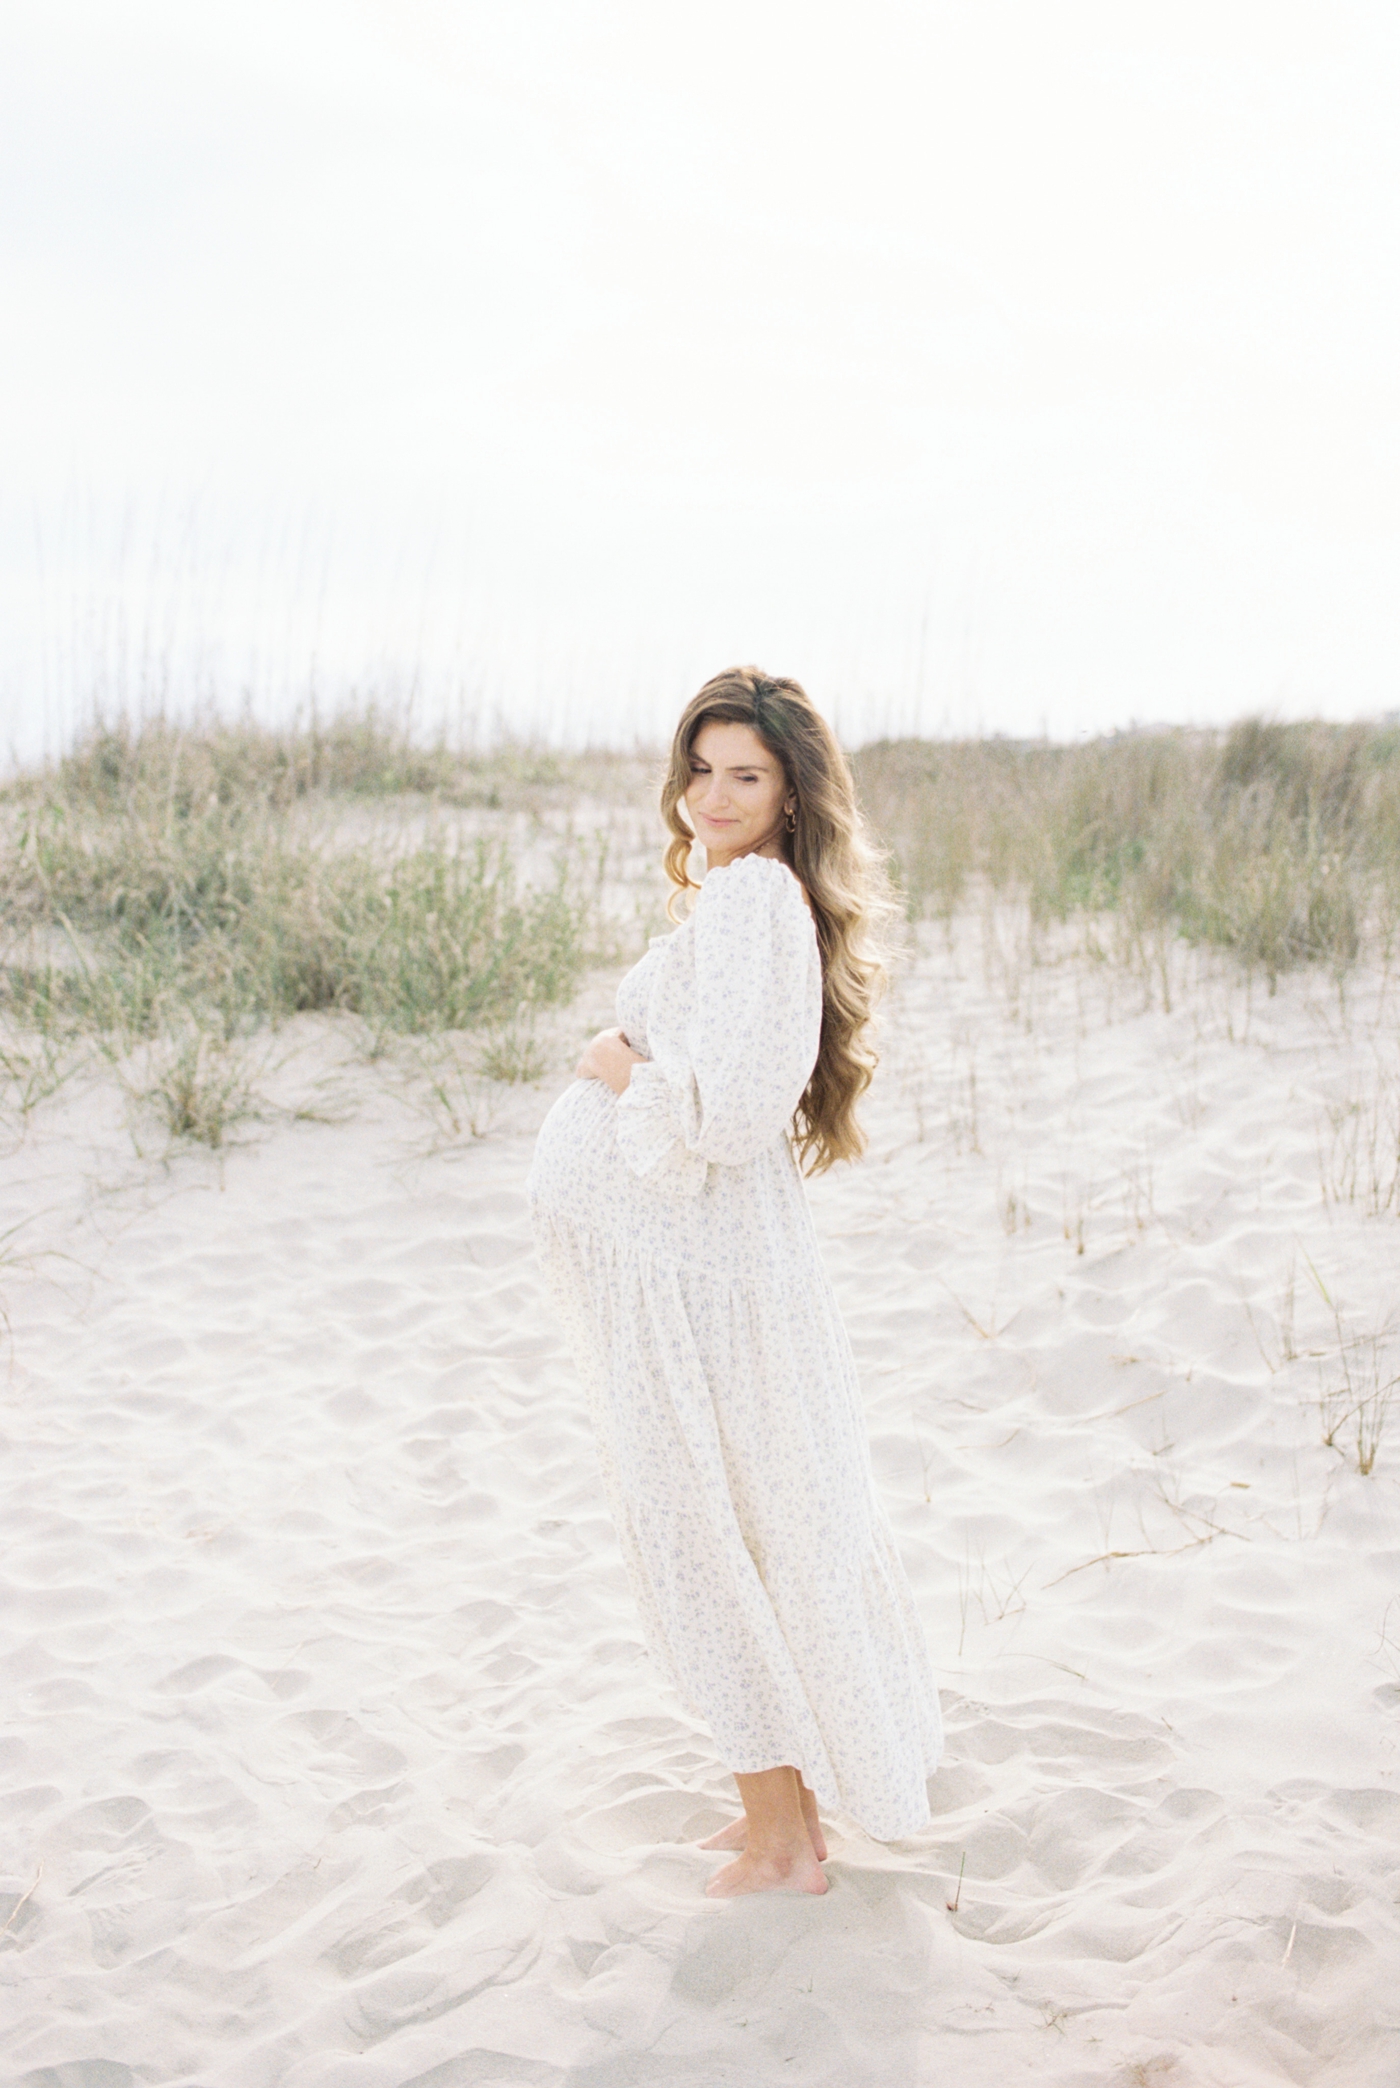 Mother to be on Sullivans Island for maternity session | Photo by Caitlyn Motycka Photography